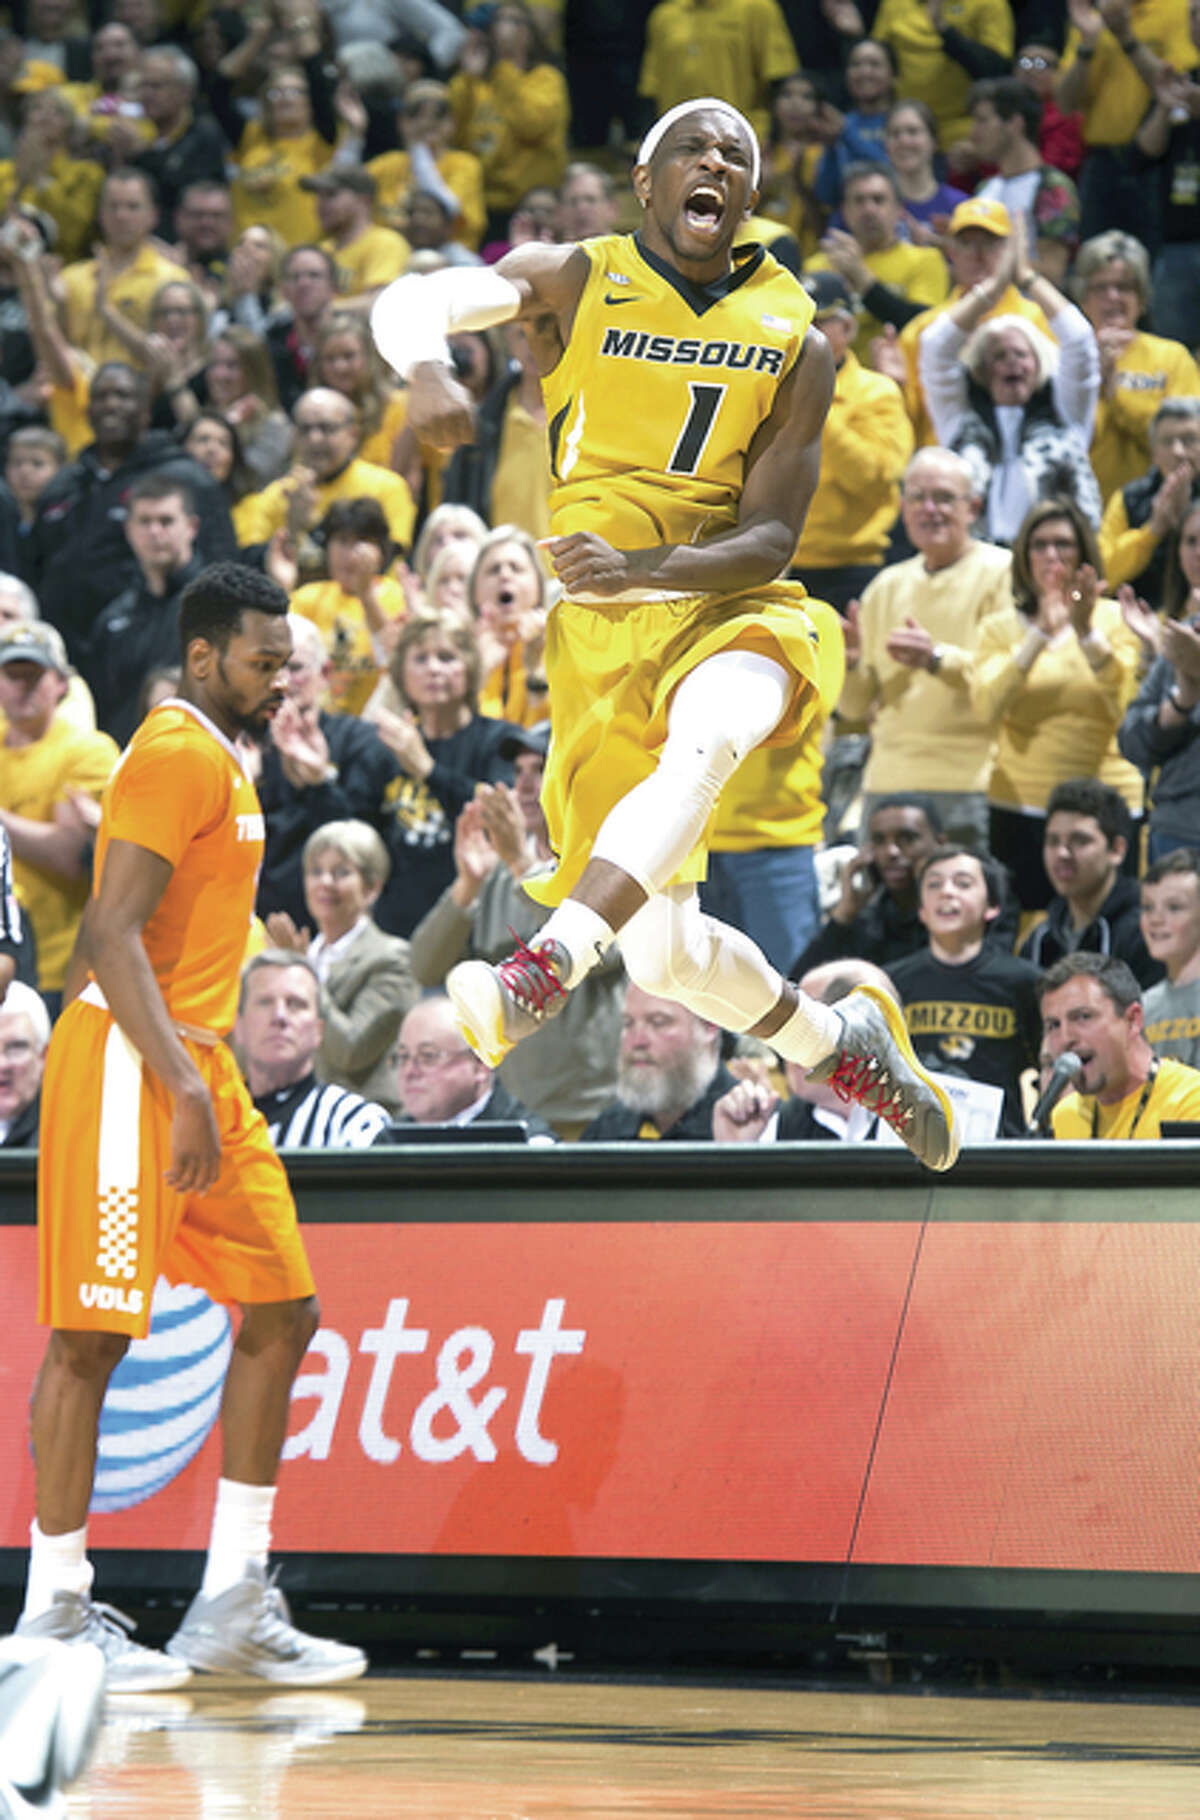 Missouri’s Terrence Phillips, right, celebrates a basket in front of Tennessee’s Kevin Punter, left, Saturday in Columbia, Mo. Missouri won the game 75-64.